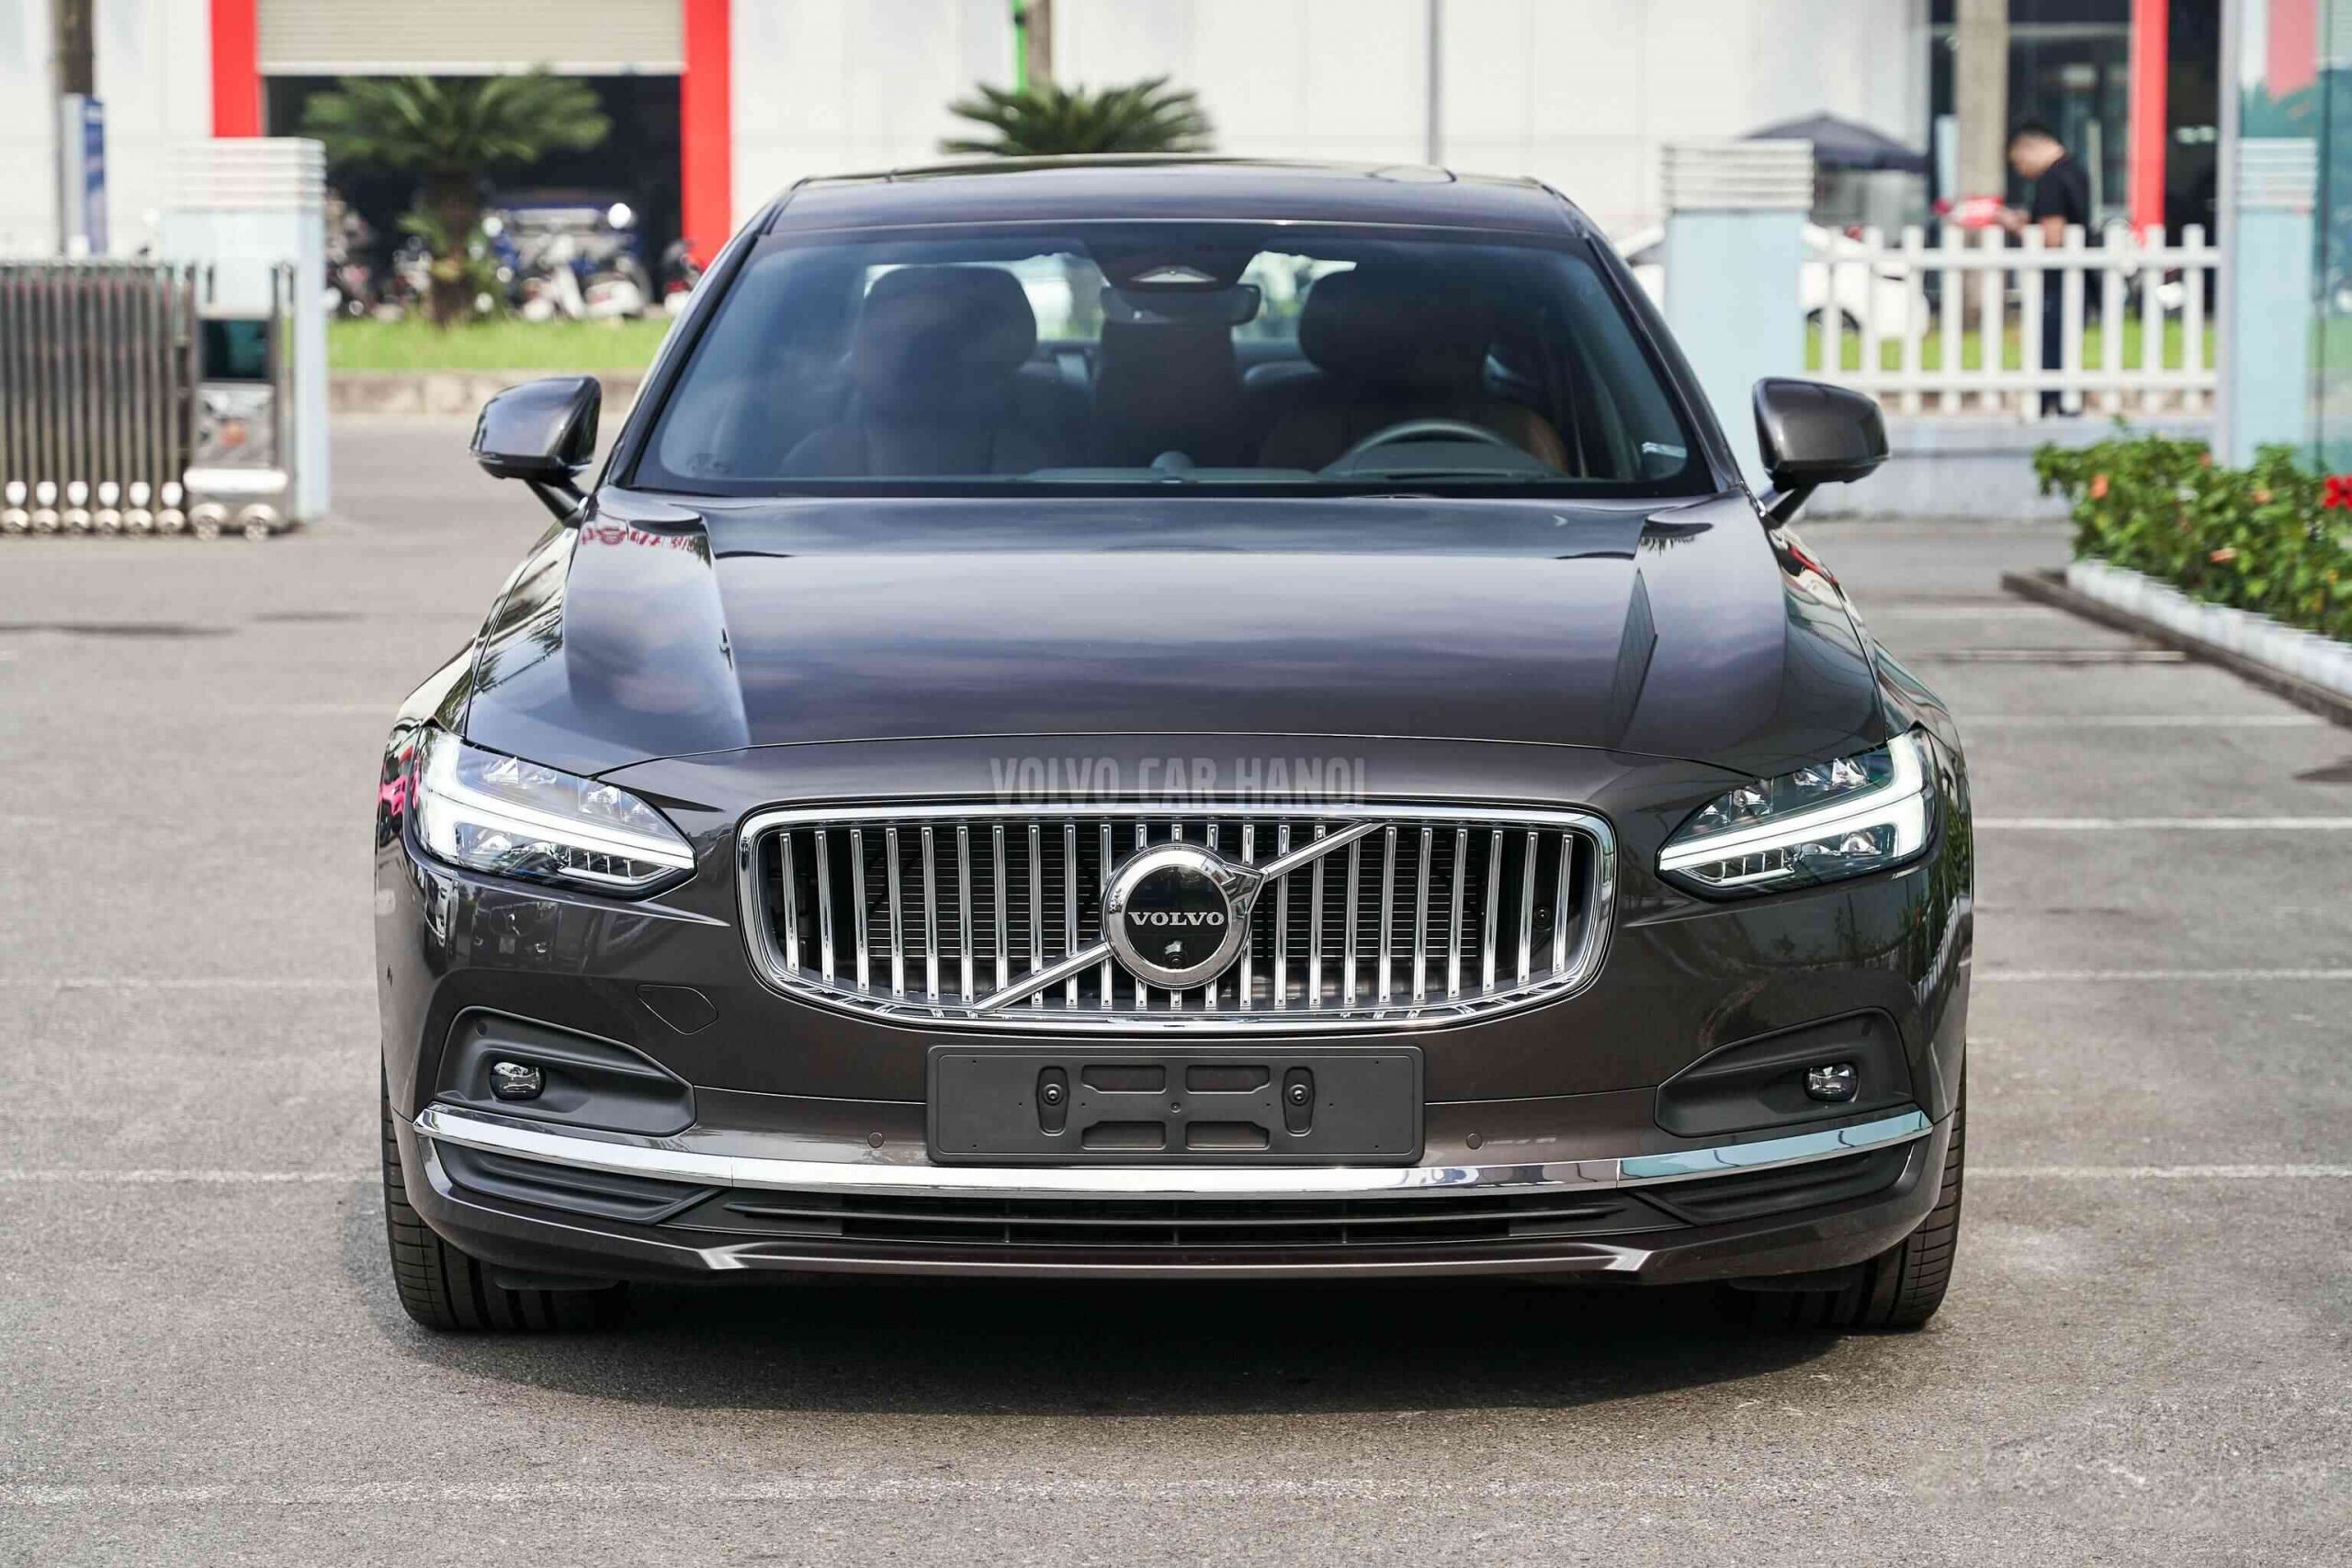 zts05053 optimized scaled Volvo S90